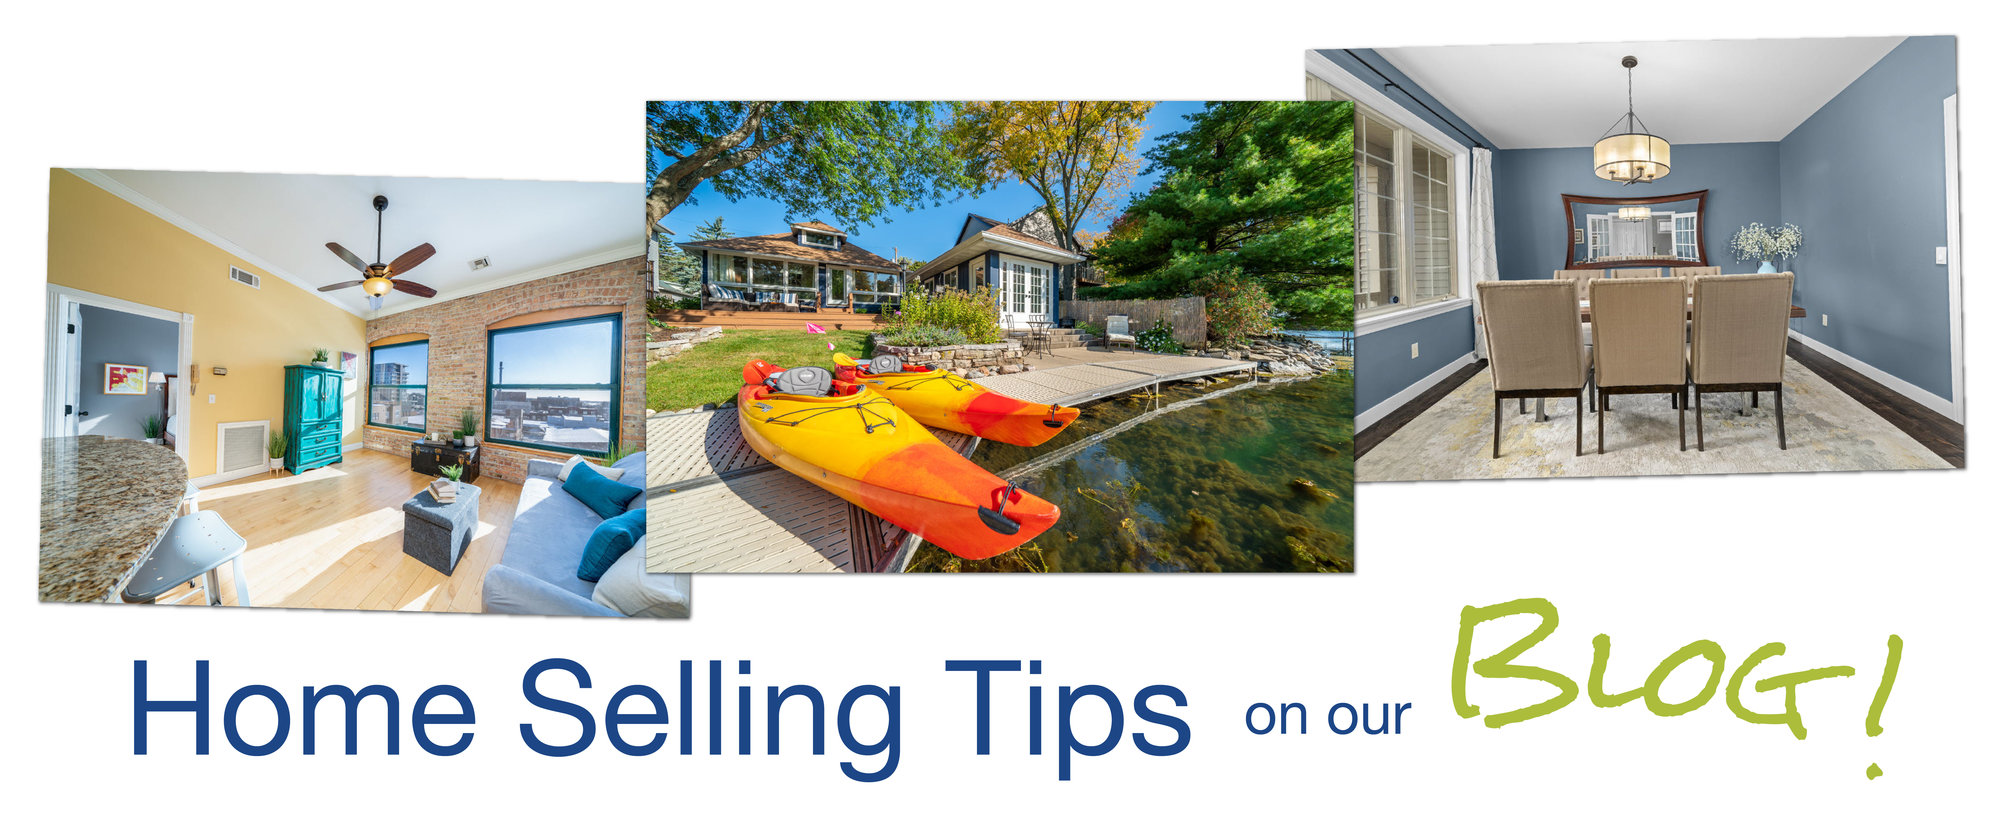 home selling tips on our blog